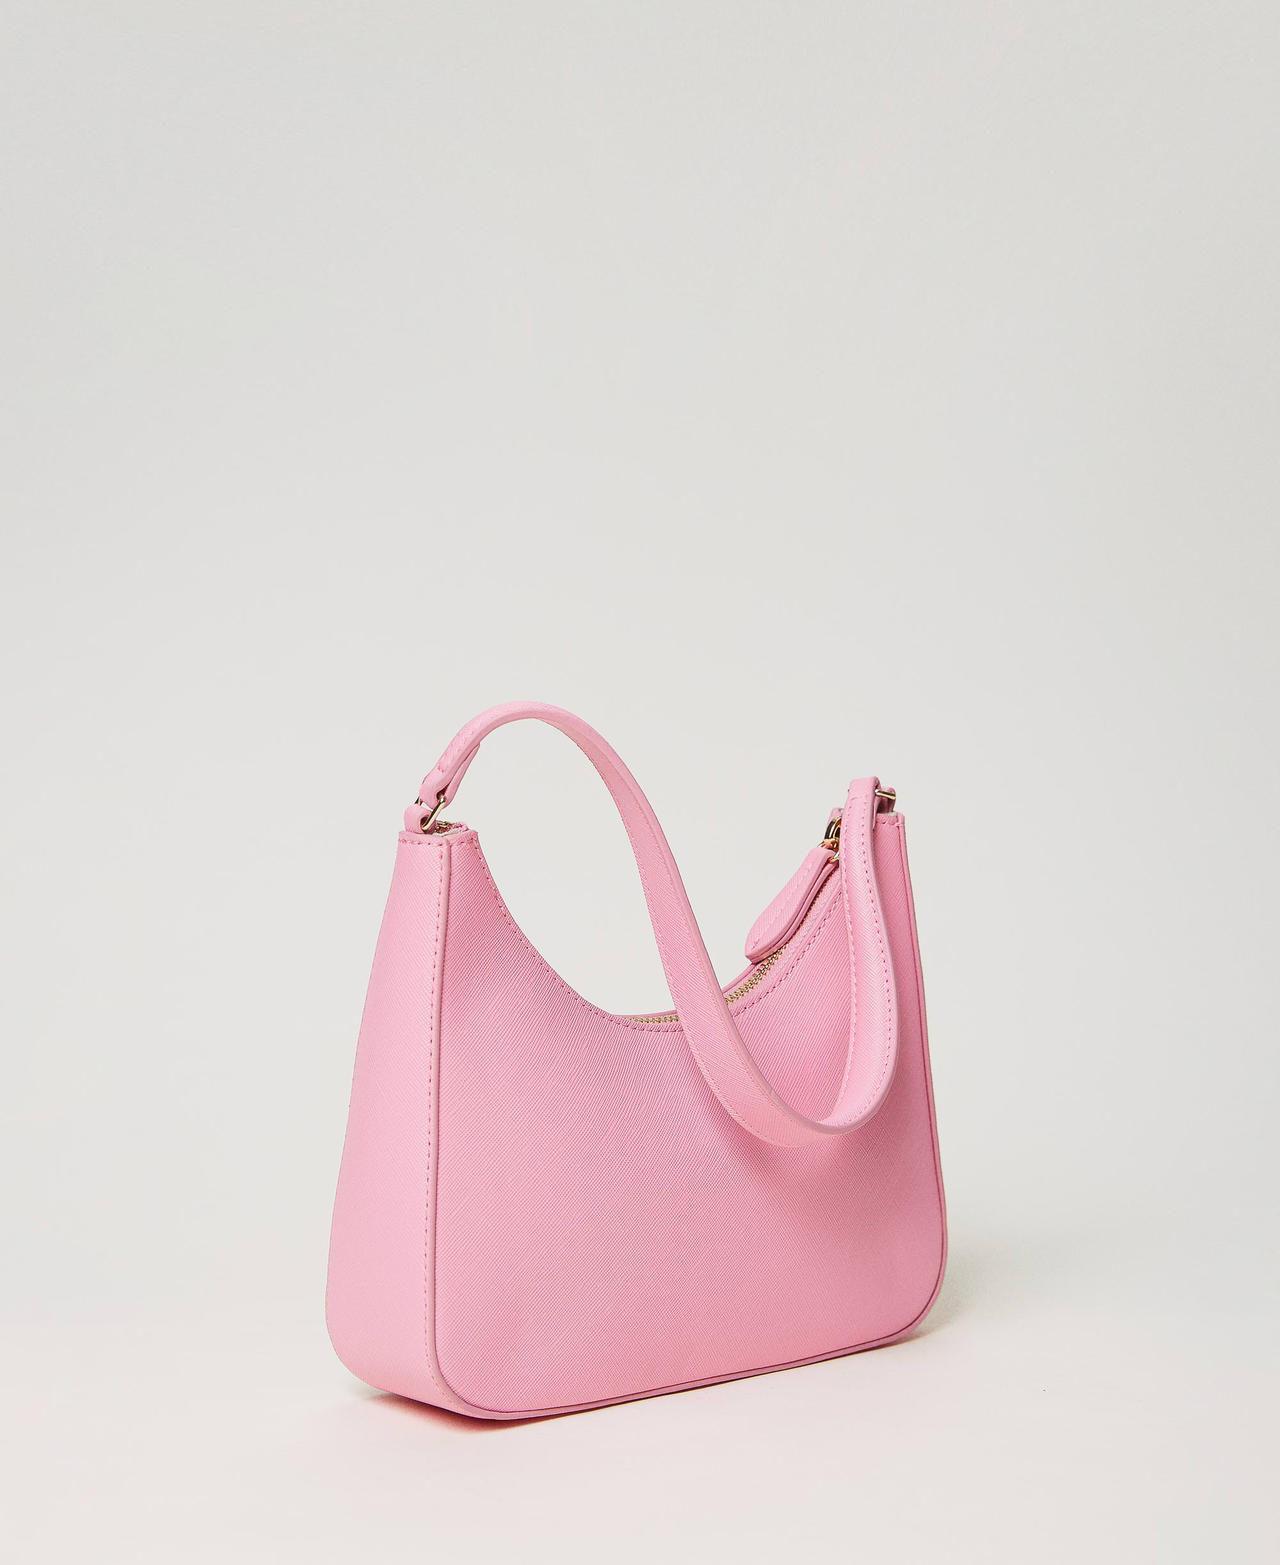 Minibolso hobo con Oval T Rosa "Prism Pink" Mujer 241TH7032-03